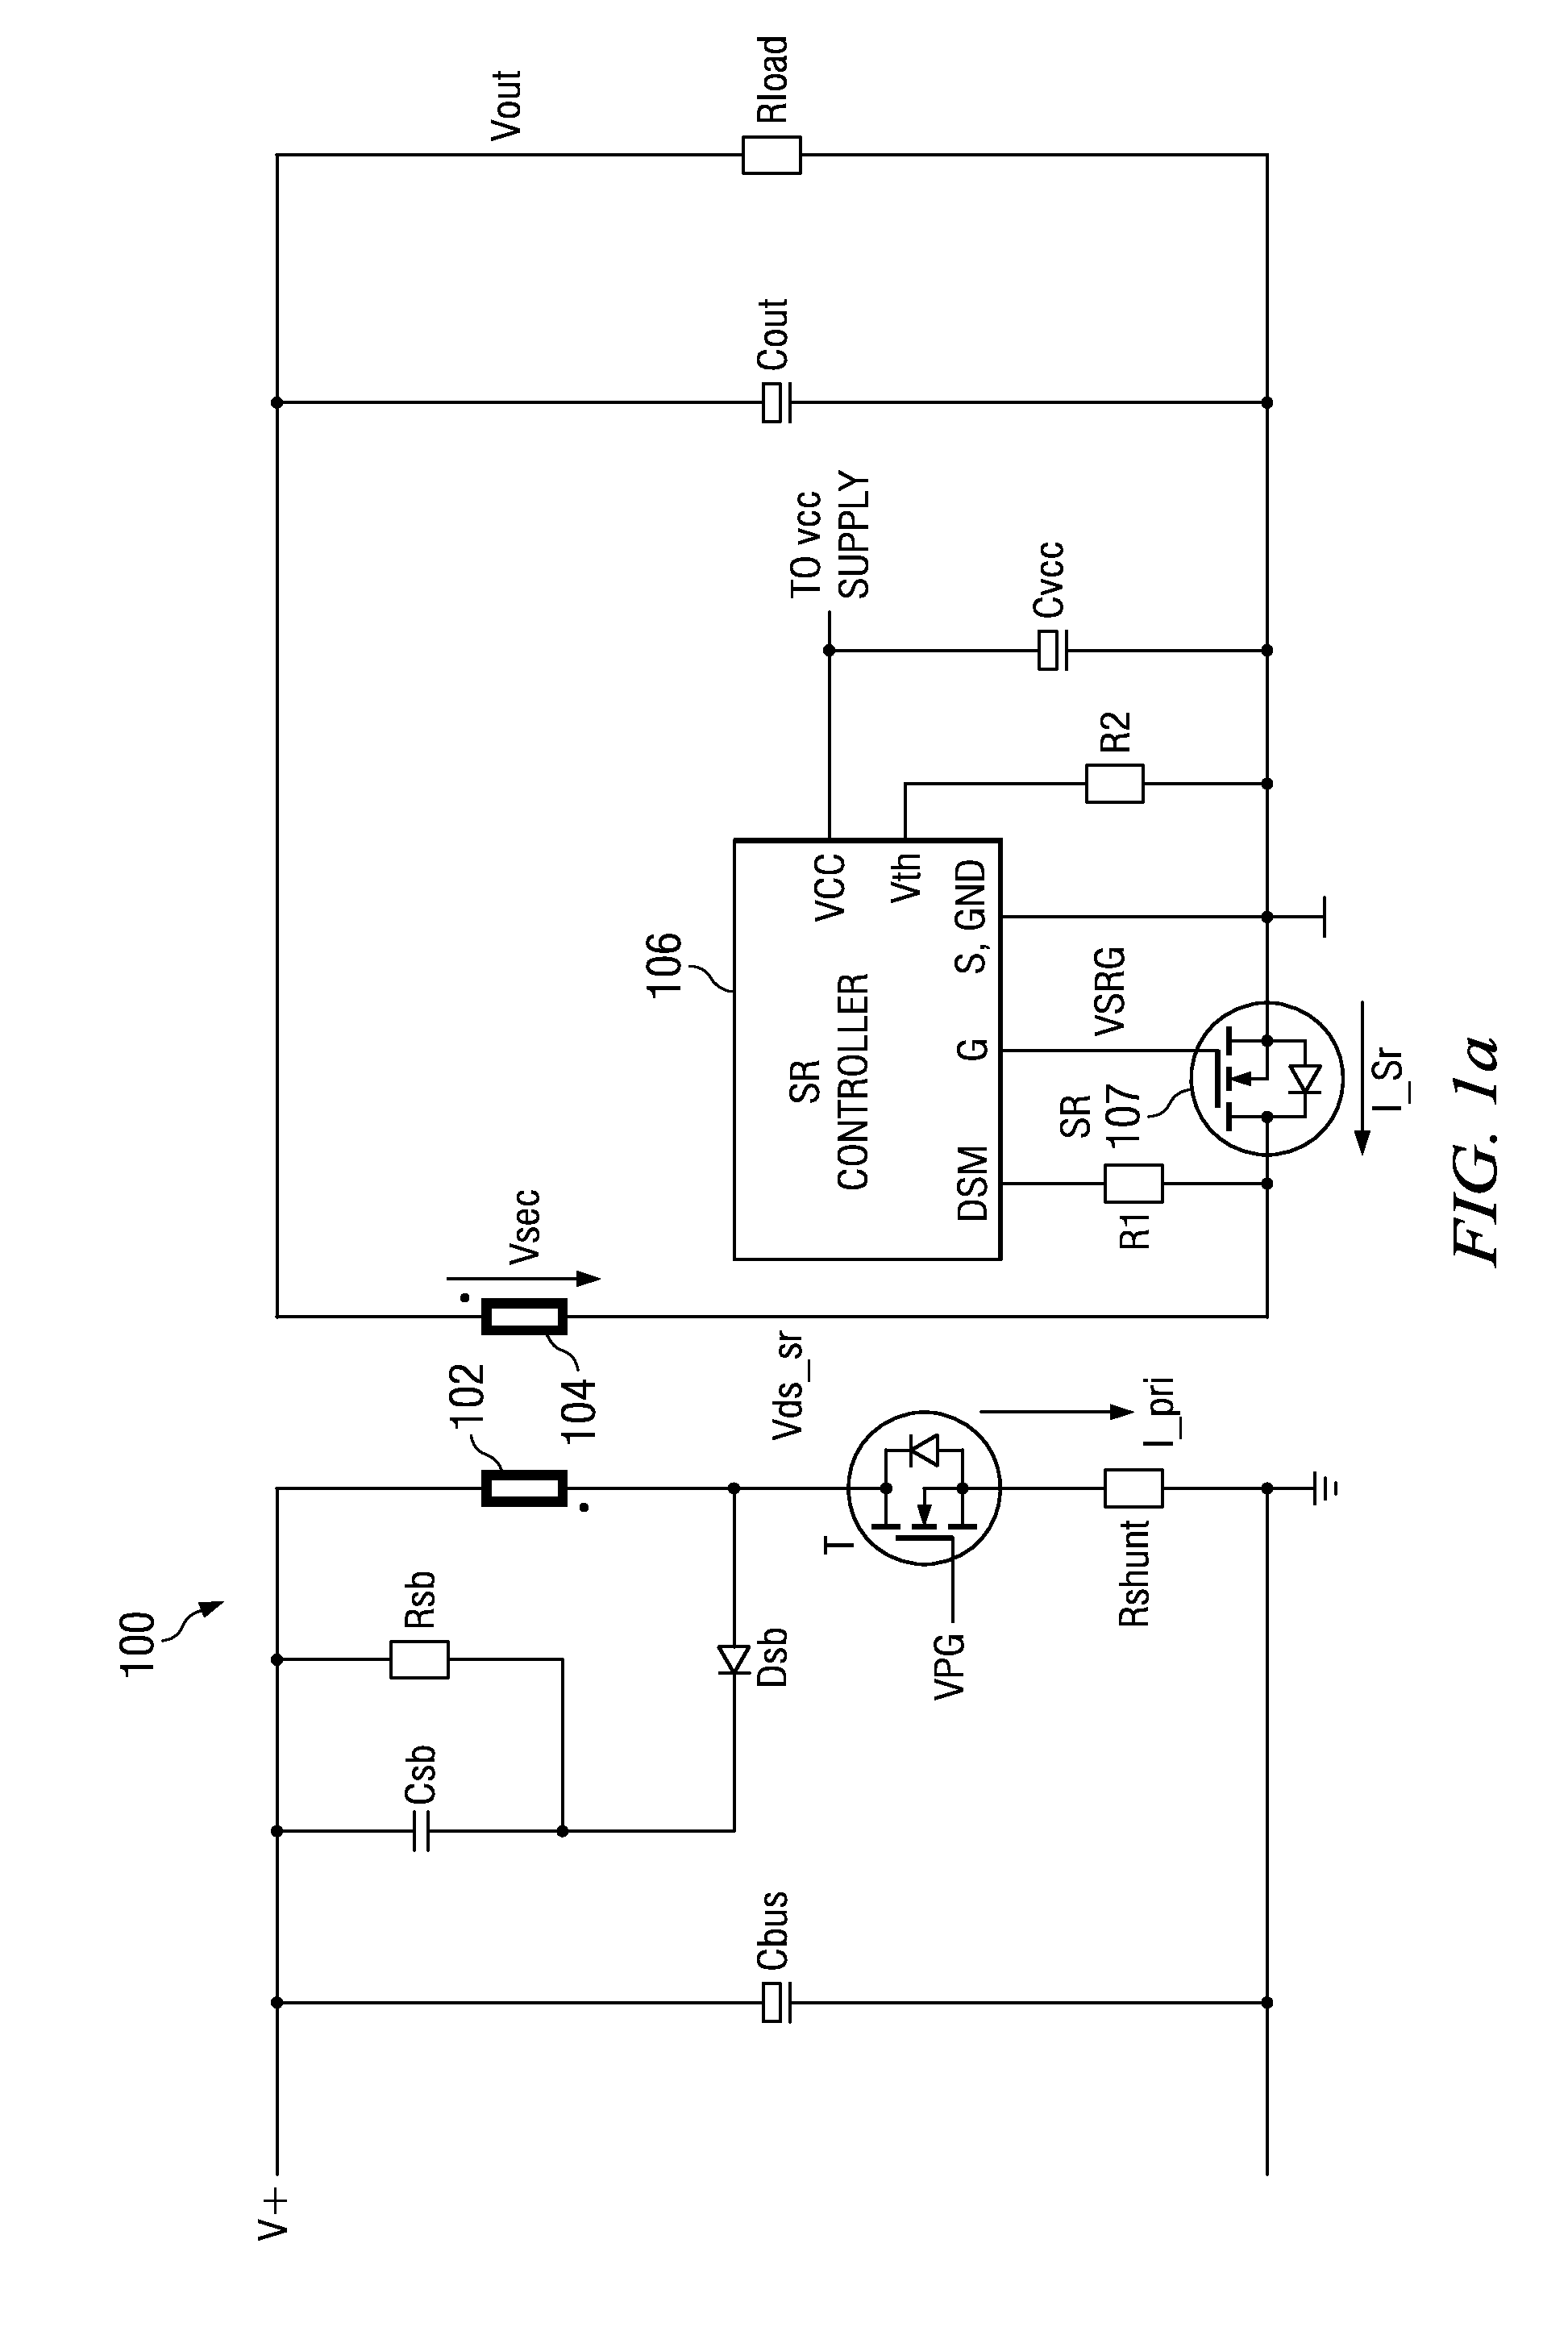 Synchronous Rectifier Control Circuit and Method